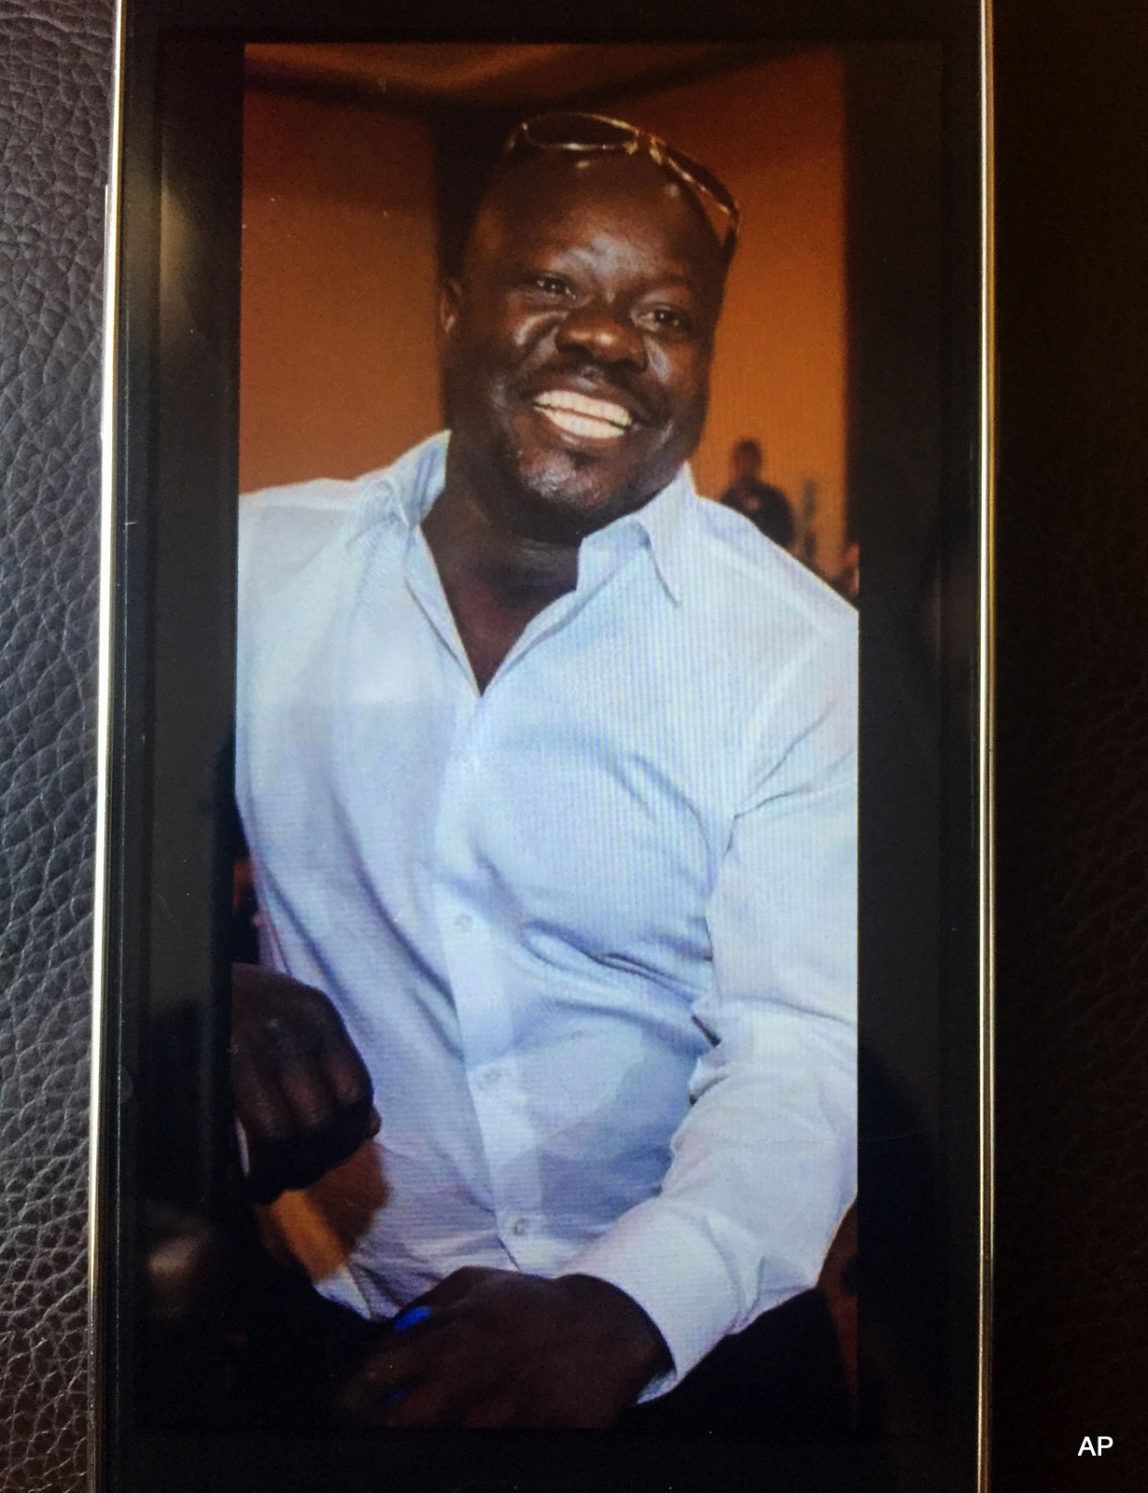 This undated cellphone photo released by Dan Gilleon, the attorney for the family of Alfred Olango, shows Alfred Olango, the Ugandan refugee killed Tuesday, Sept. 27, 2016, in El Cajon, Calif. The fatal police shooting of Olango, who drew something from his pocket and extended his hands in a "shooting stance" happened about a minute after officers in a San Diego suburb arrived at the scene where a mentally unstable man was reportedly walking in traffic, a police spokesman said Wednesday.